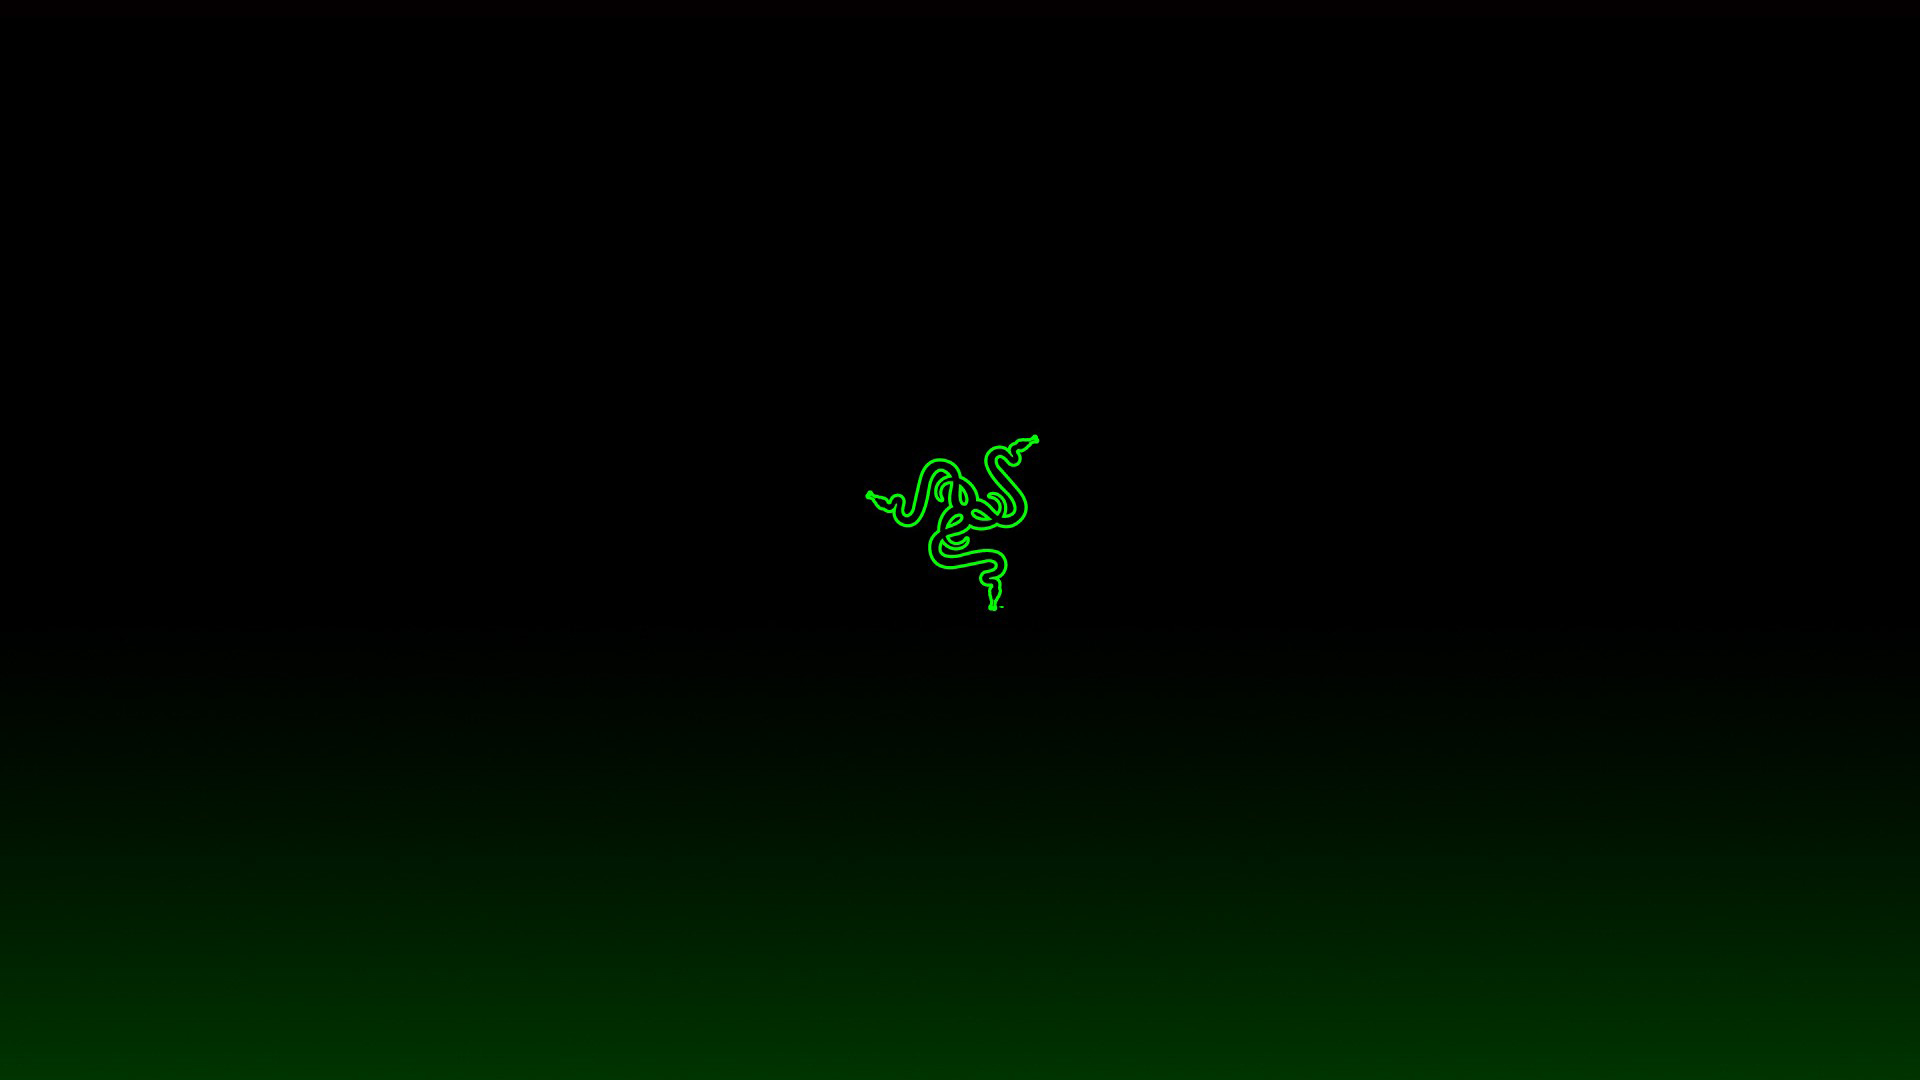 Free Download Razer Green Logo Hd Wallpaper 19x1080 1080p Compatible For 1280x7 19x1080 For Your Desktop Mobile Tablet Explore 48 Pc Gaming Wallpaper 1080p Gaming Wallpaper Hd Hd Video